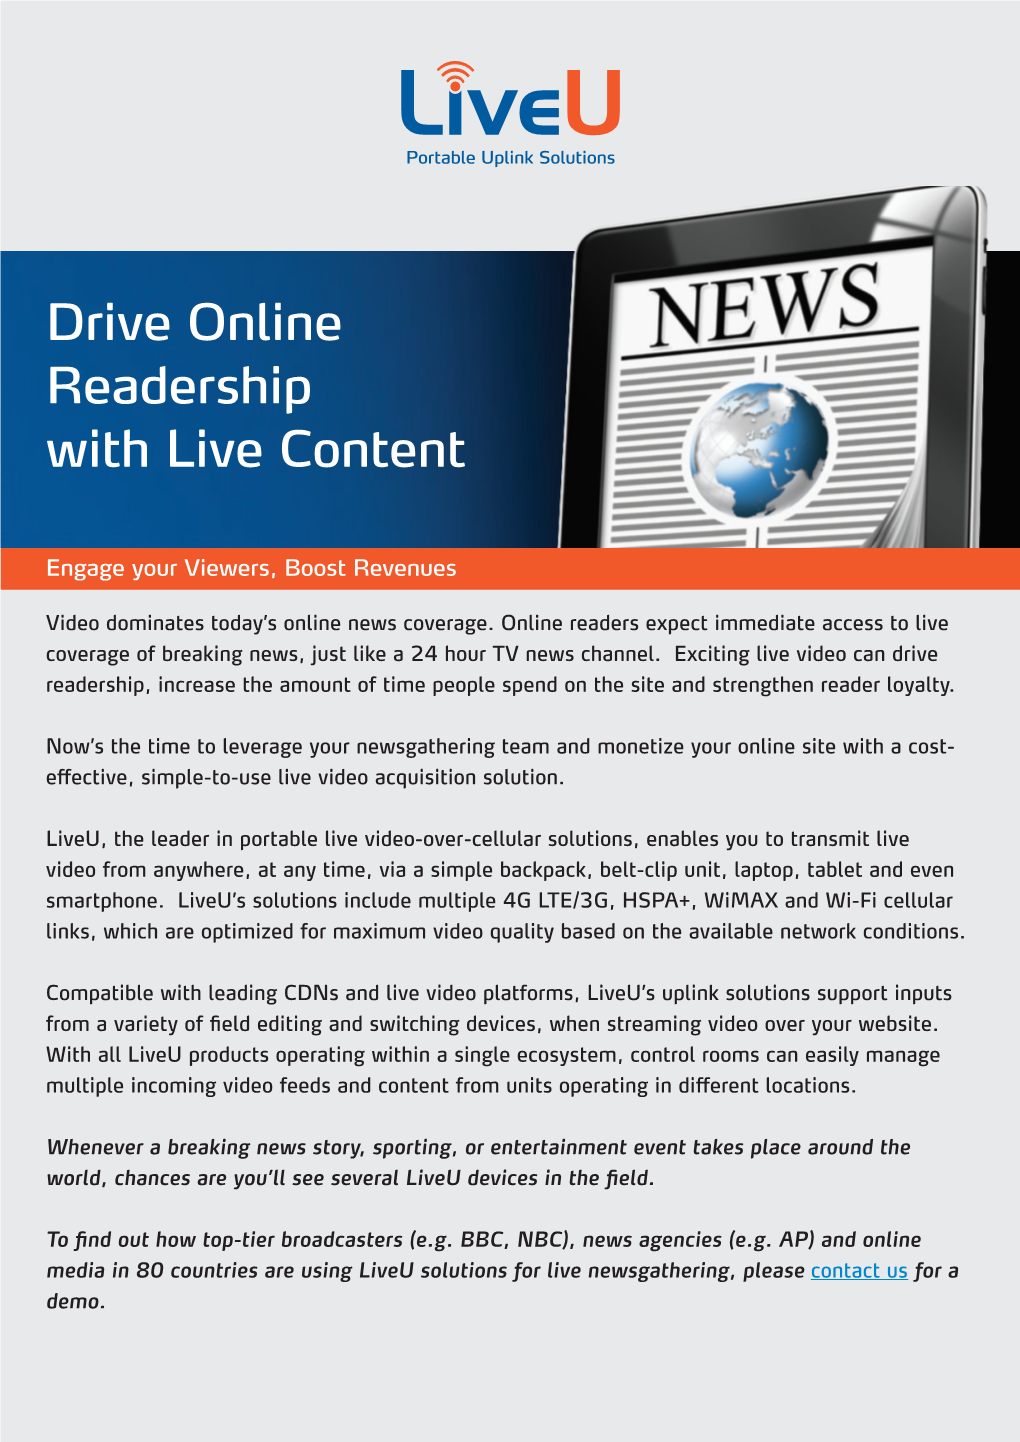 Drive Online Readership with Live Content